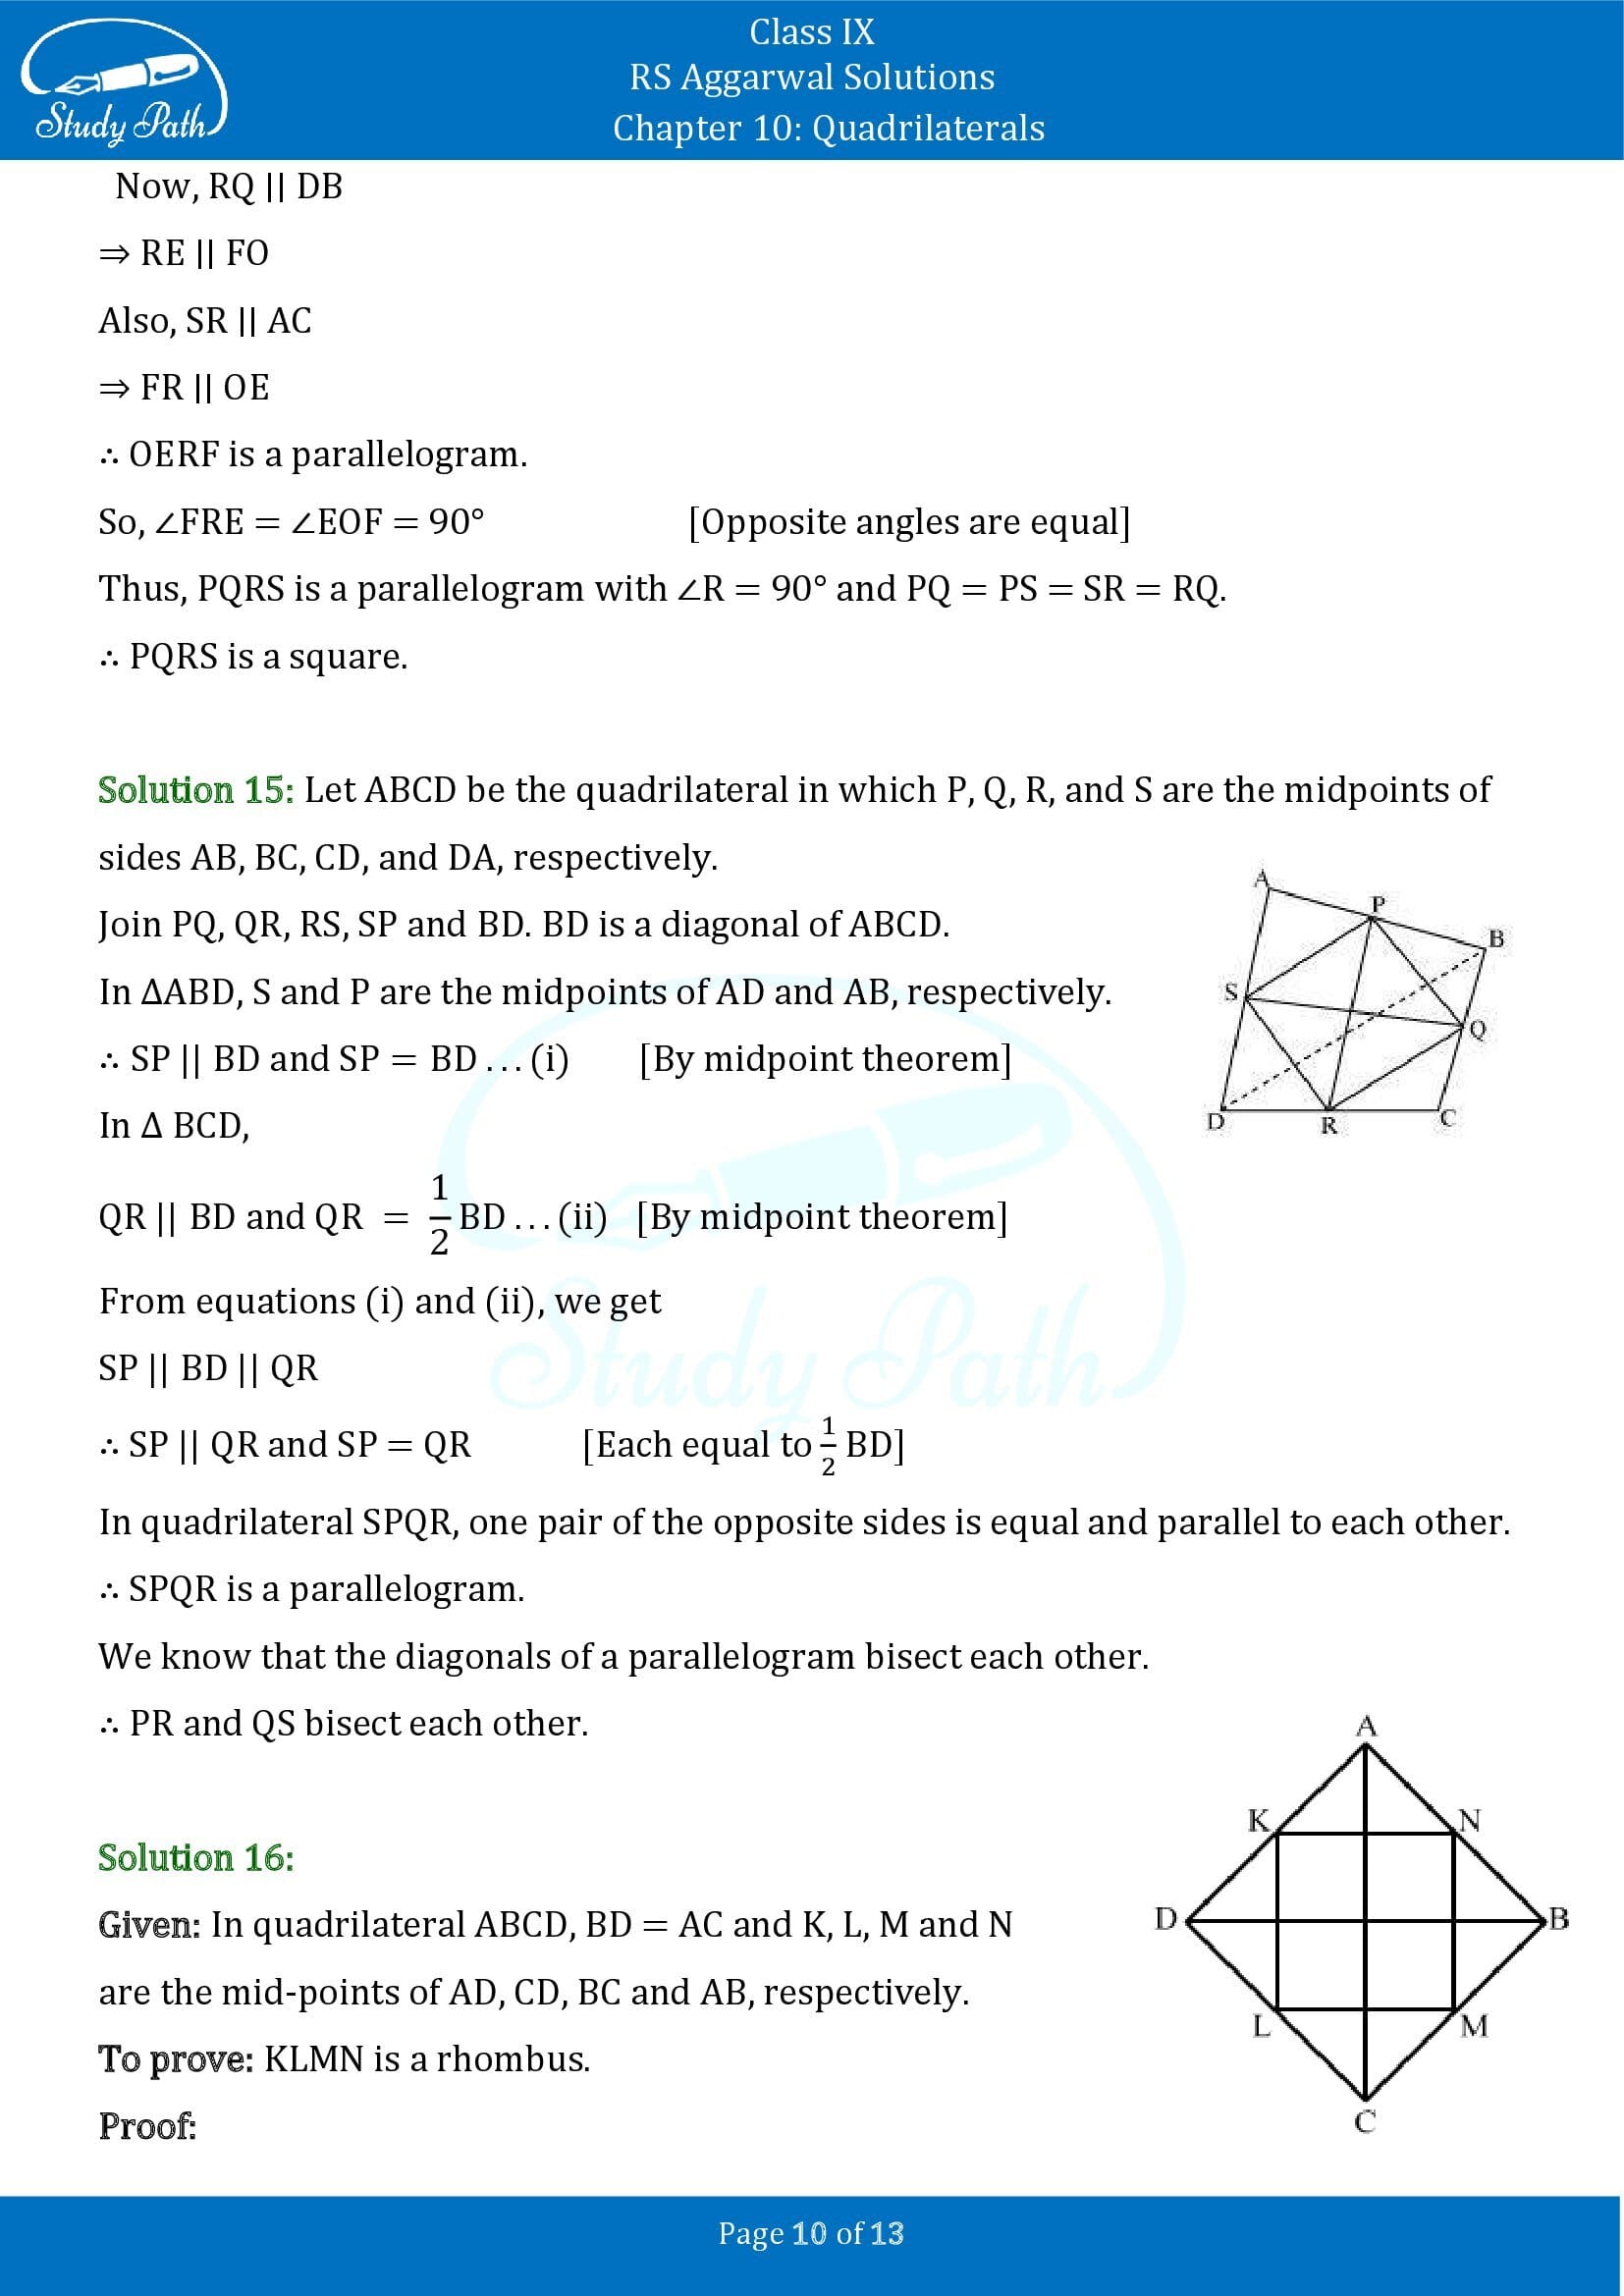 RS Aggarwal Solutions Class 9 Chapter 10 Quadrilaterals Exercise 10C 00010